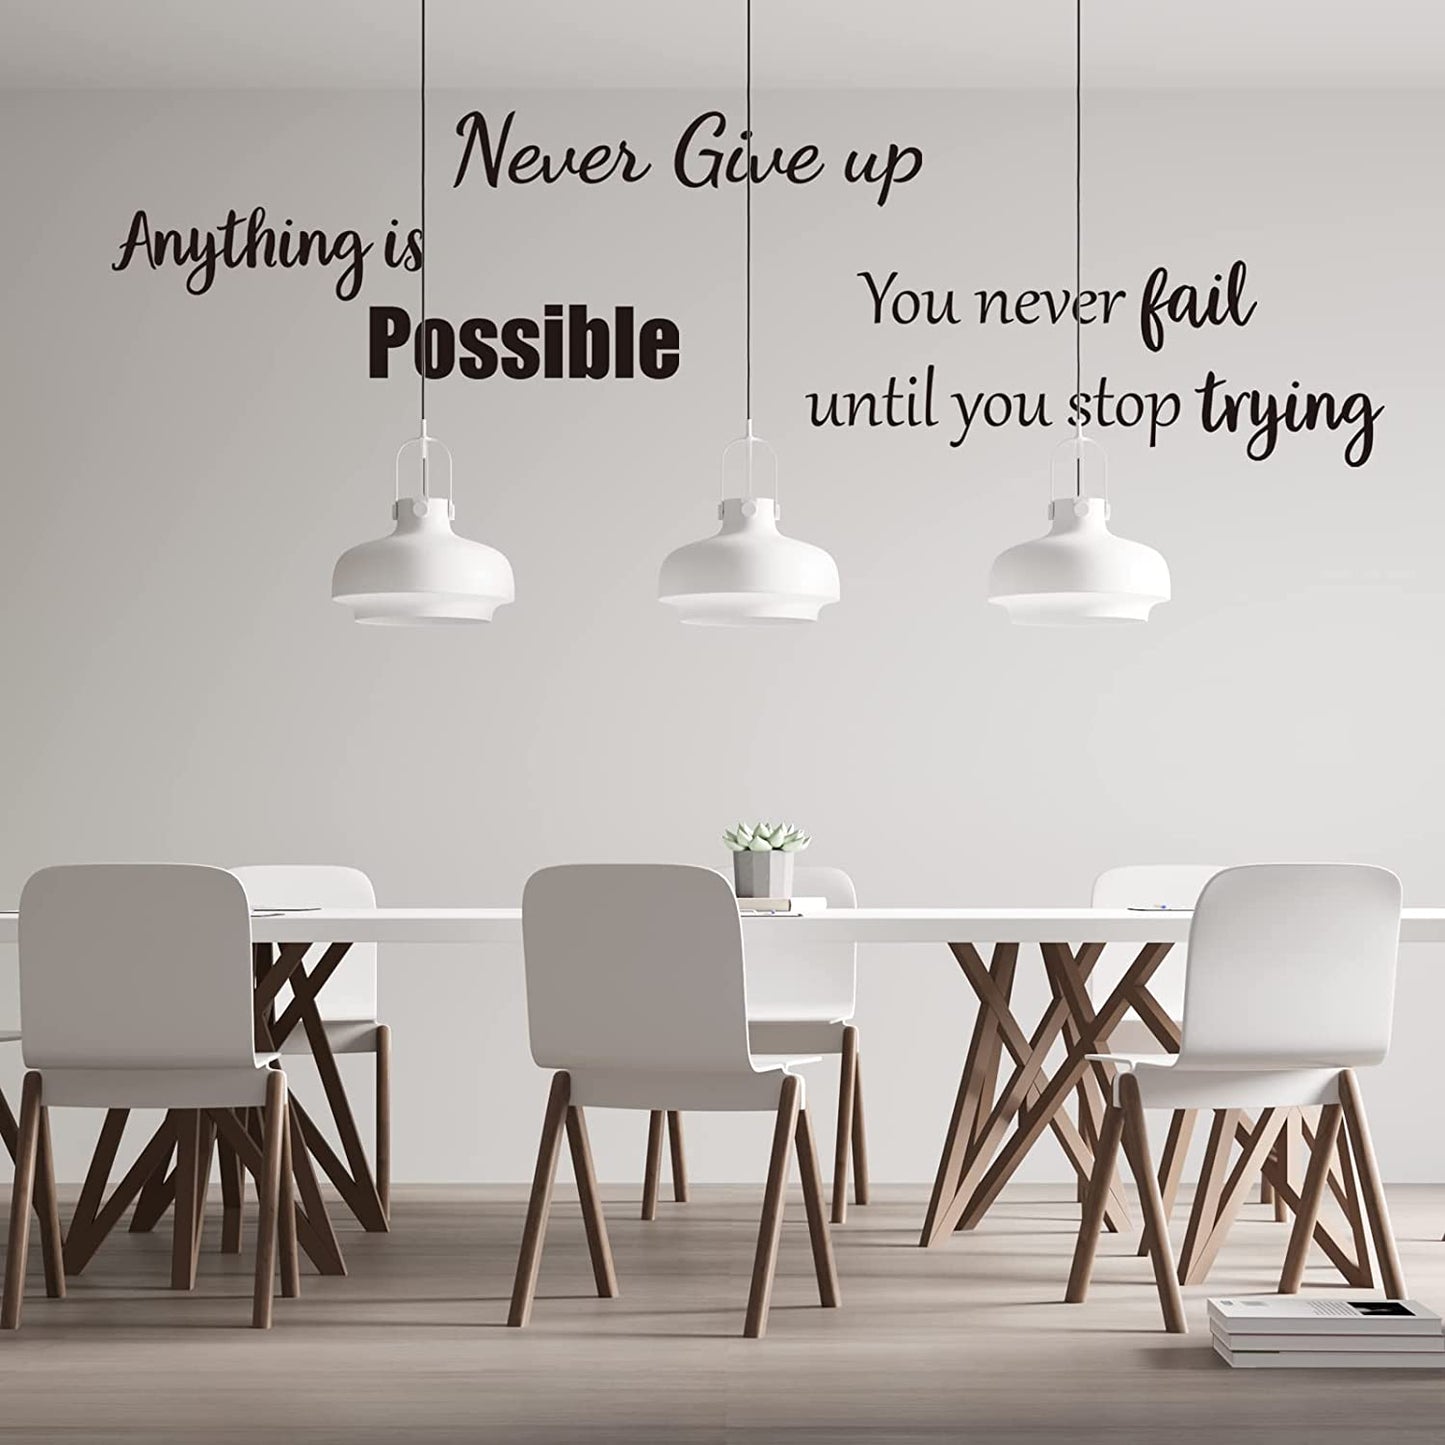 Inspirational Wall Decals Quotes, Motivational Affirmation Wall Stickers, Vinyl Wall Quotes Stickers, Peel & Stick Positive Sayings for Bedroom/Living Room/Bathroom/Office Wall Décor